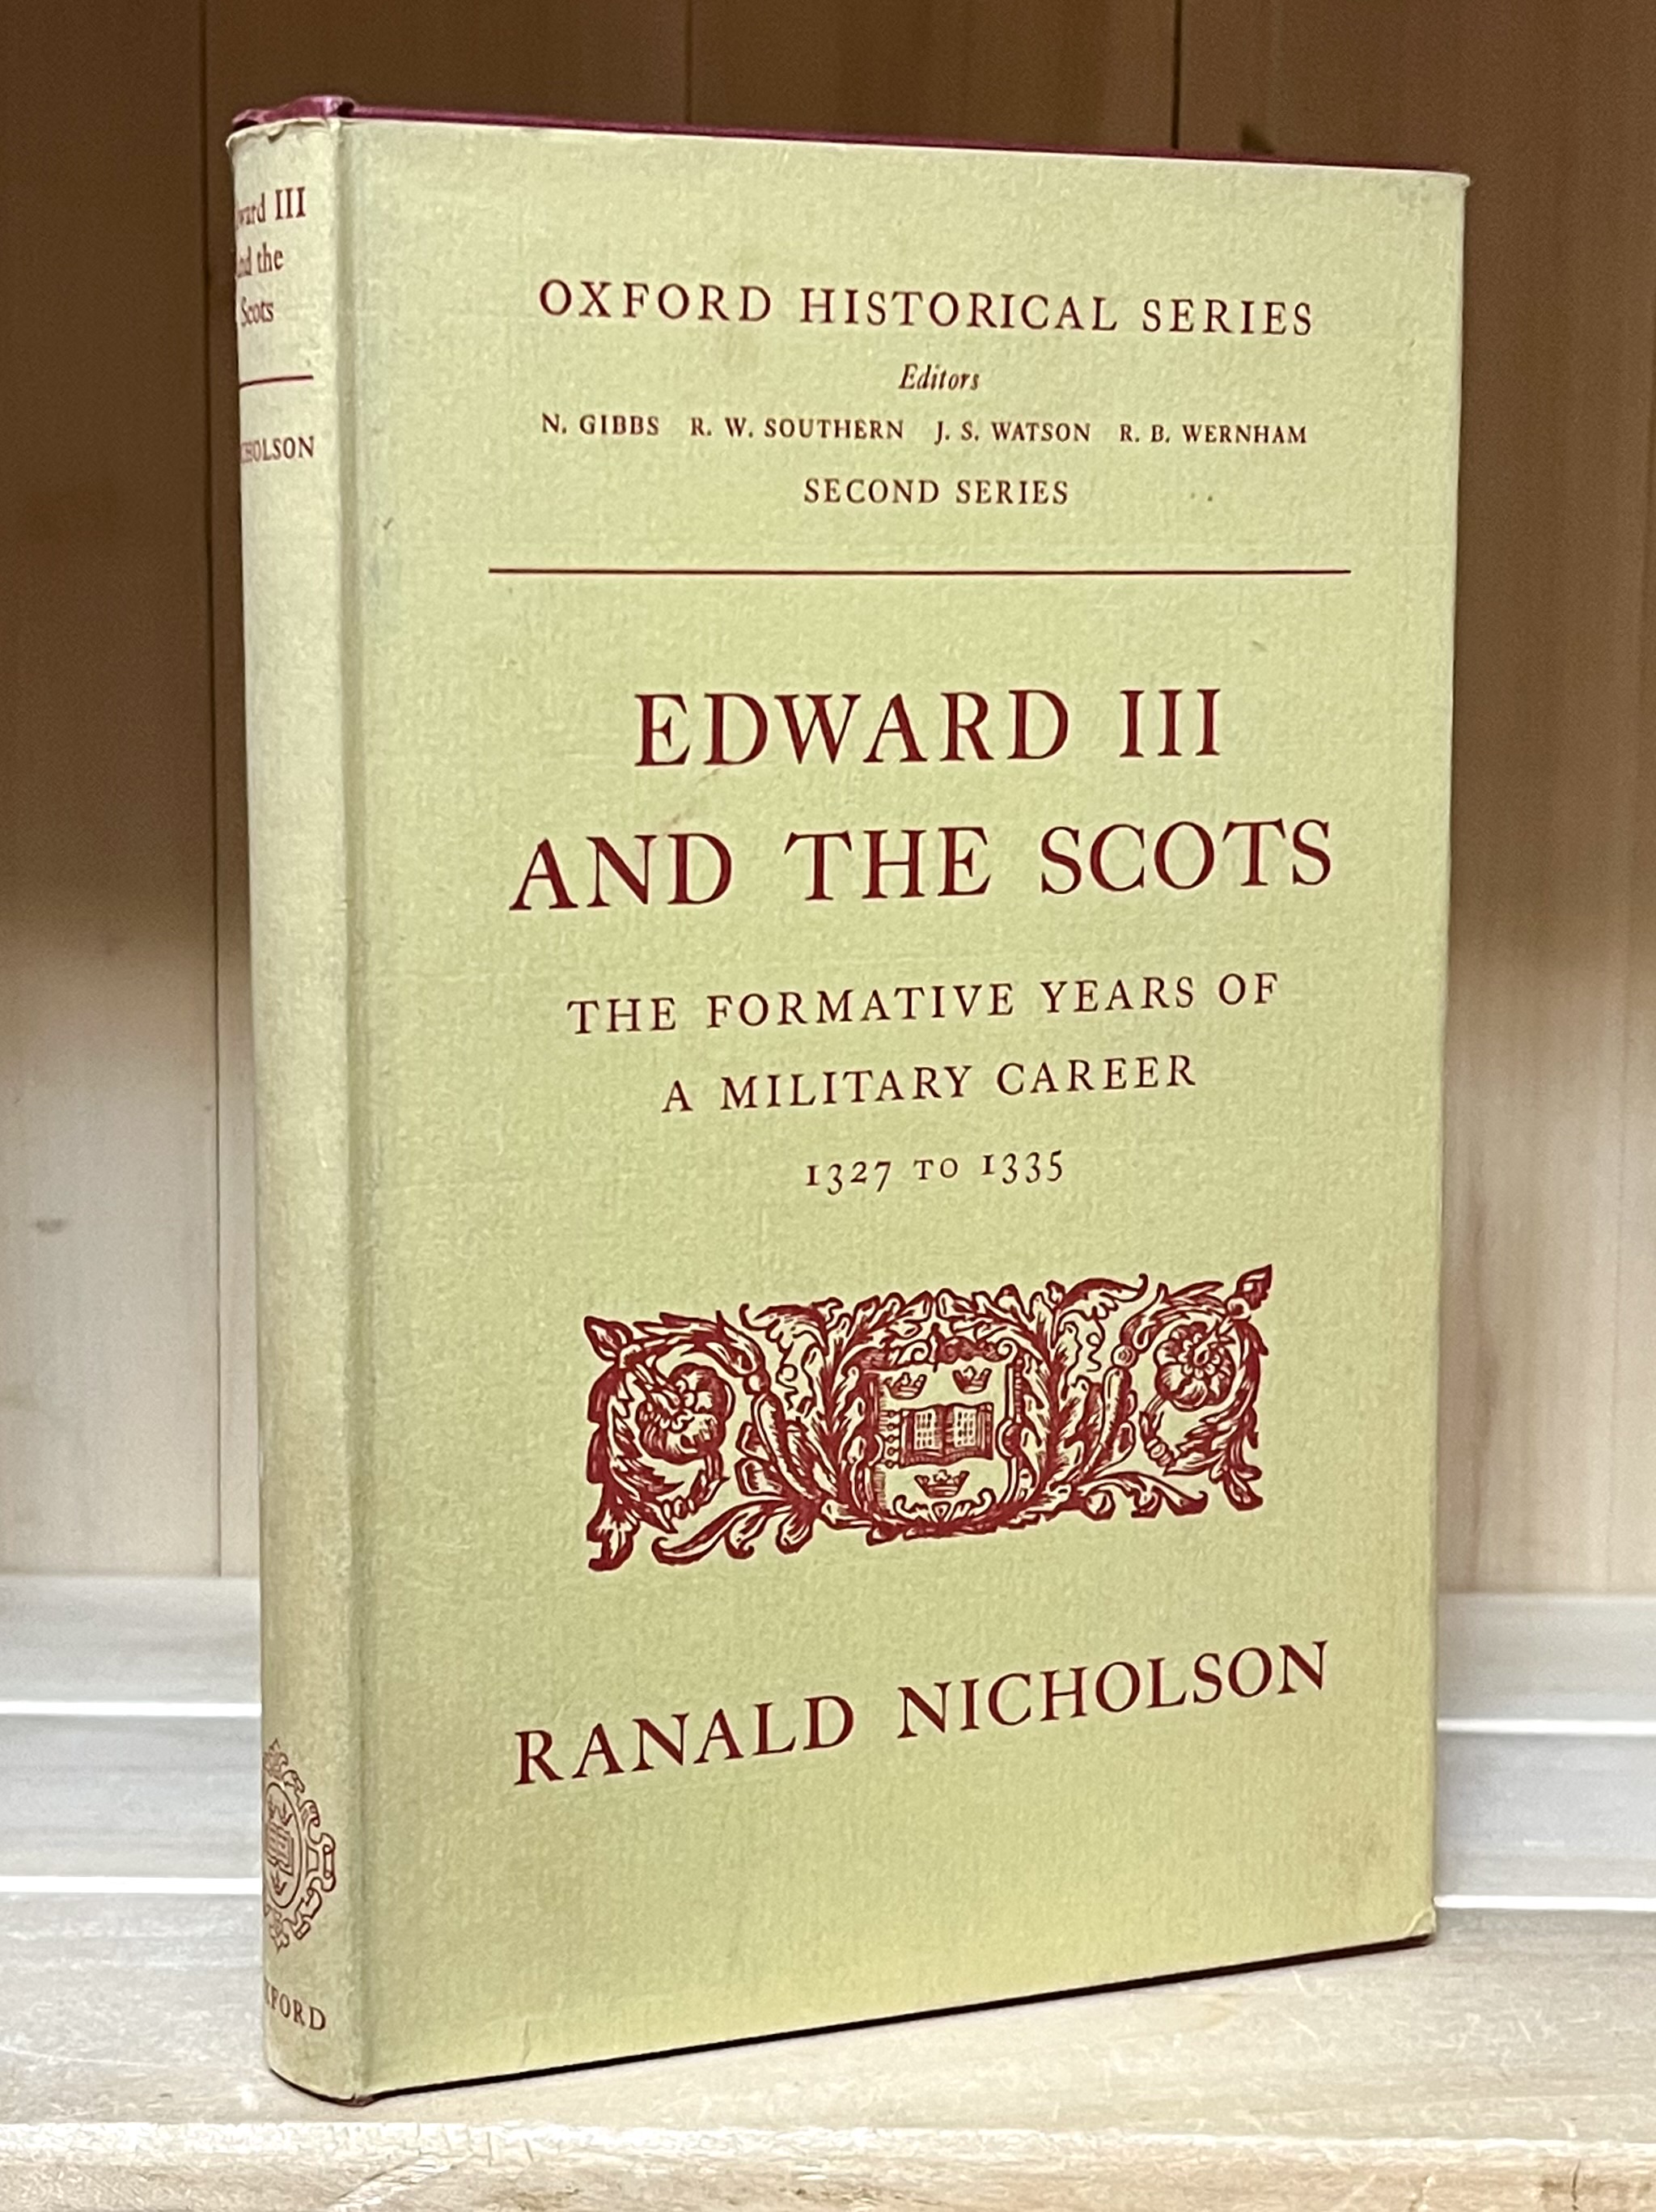 Image for Edward III and the Scots: The Formative Years of a Military Career 1327 to 1335 (Oxford Historical Series)